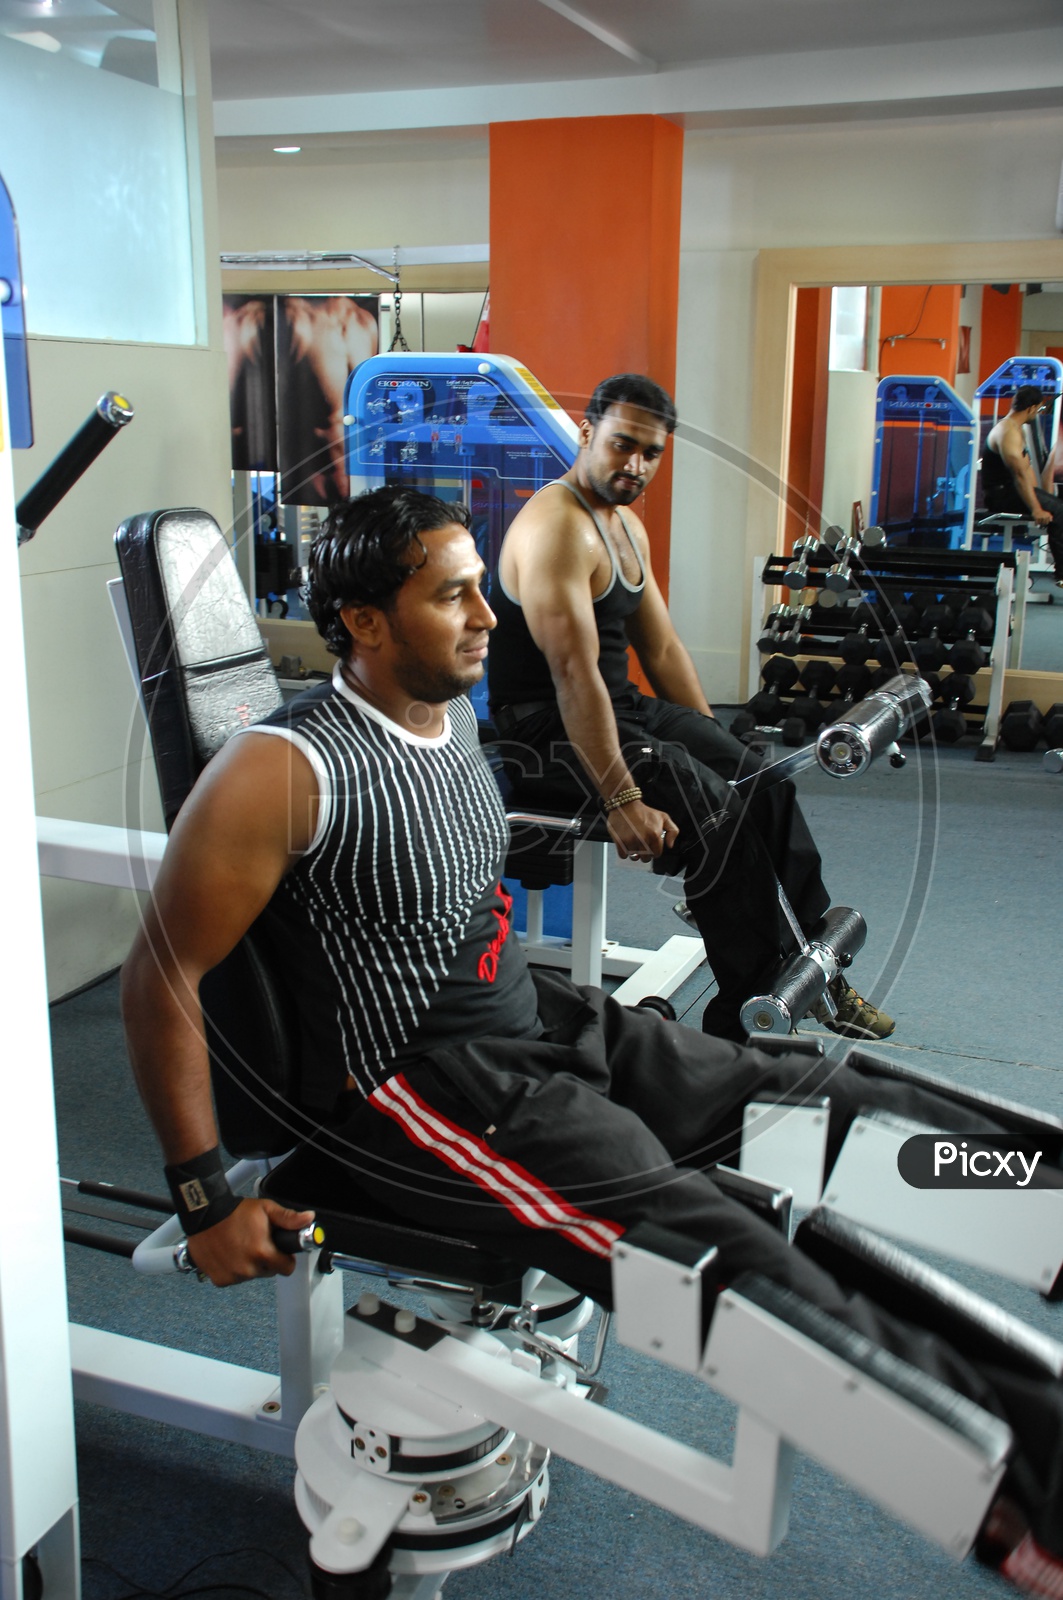 Man doing Leg Adduction / Abduction Machine exercise alongside the man doing leg extension machine in a Gym